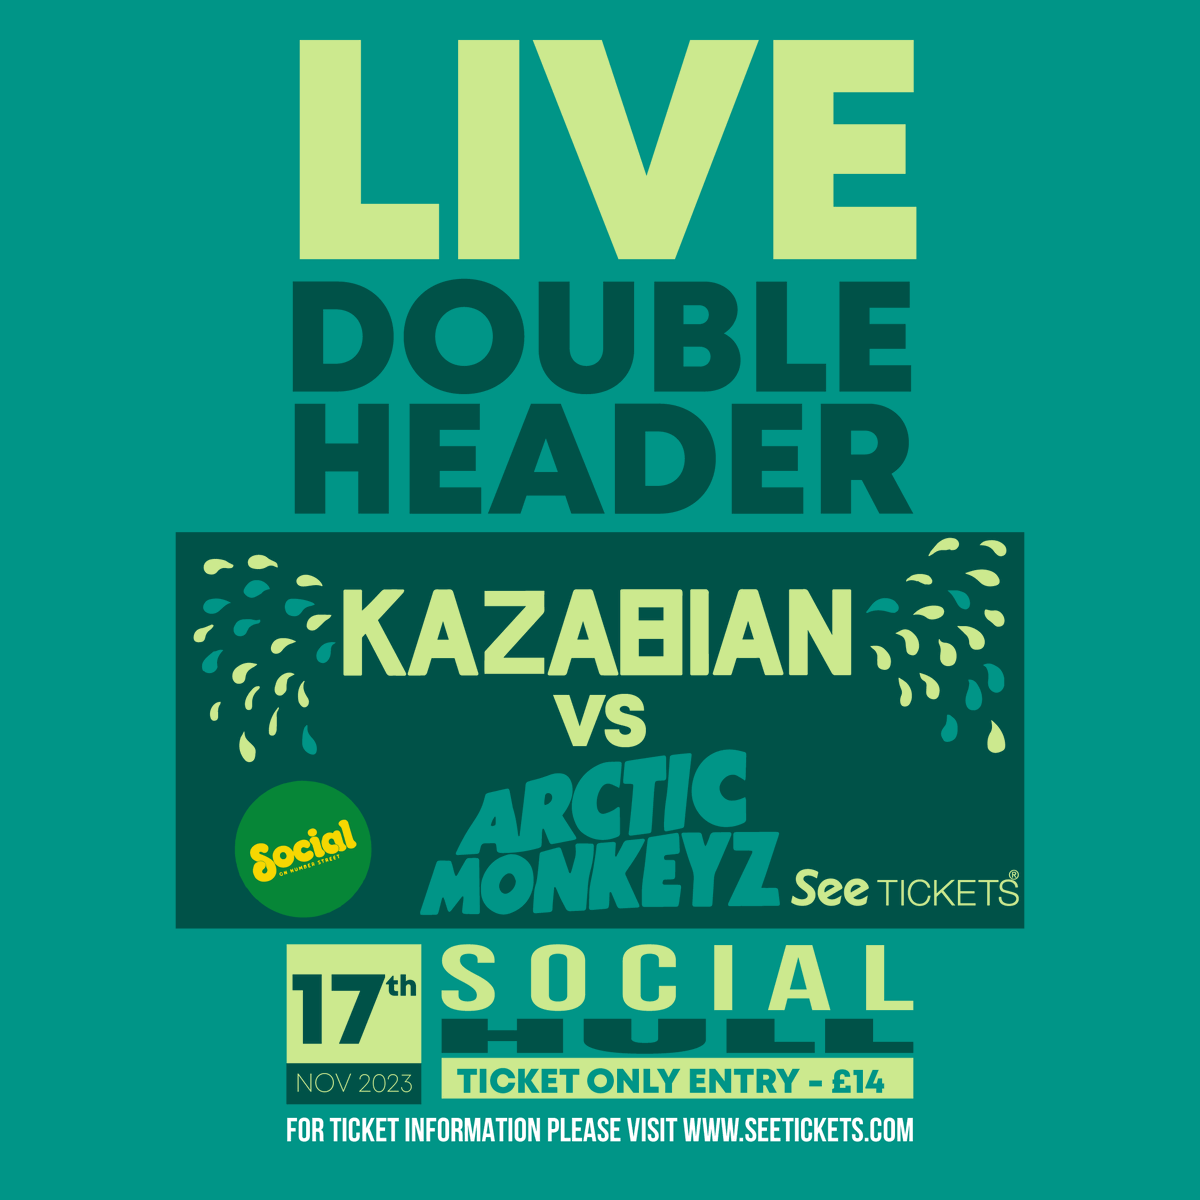 ❗️ TICKET ALERT - 50 LEFT The official and number one tribute act to the mighty Kasabian - @KazabianUK is back at Social this week for a double-header with Arctic Monkeyz. 📆 Friday 17 November 🎟 book via: bit.ly/KazabianvsArct…